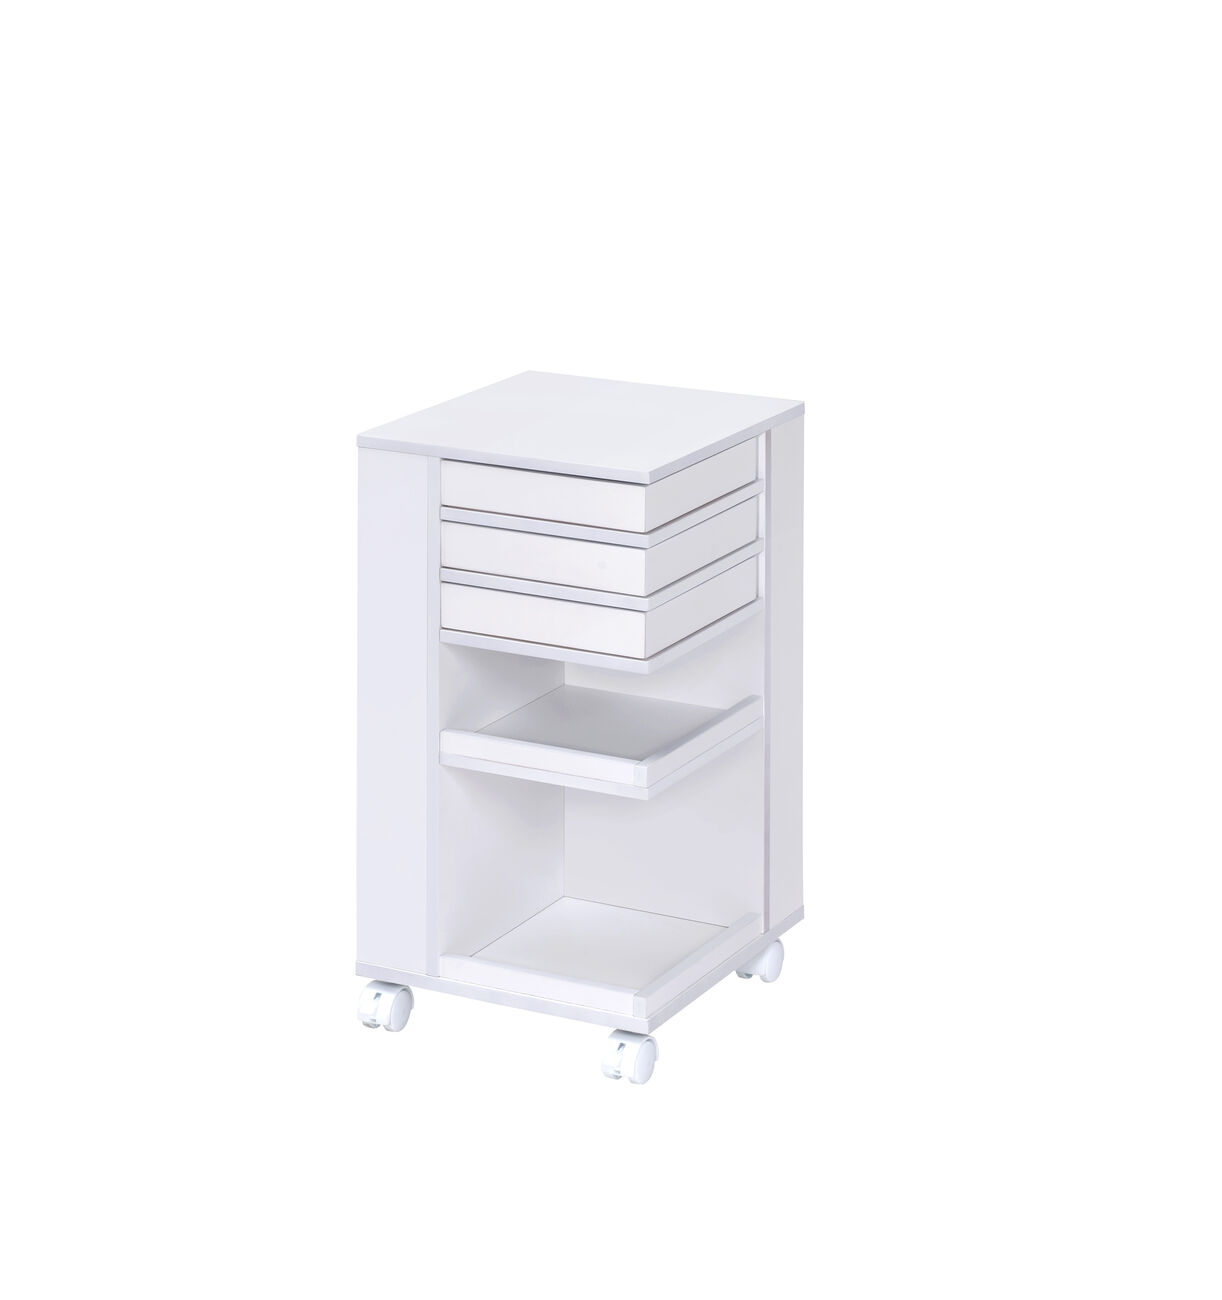 Wooden Storage Cart with 3 Drawers and 2 Open Shelves, White